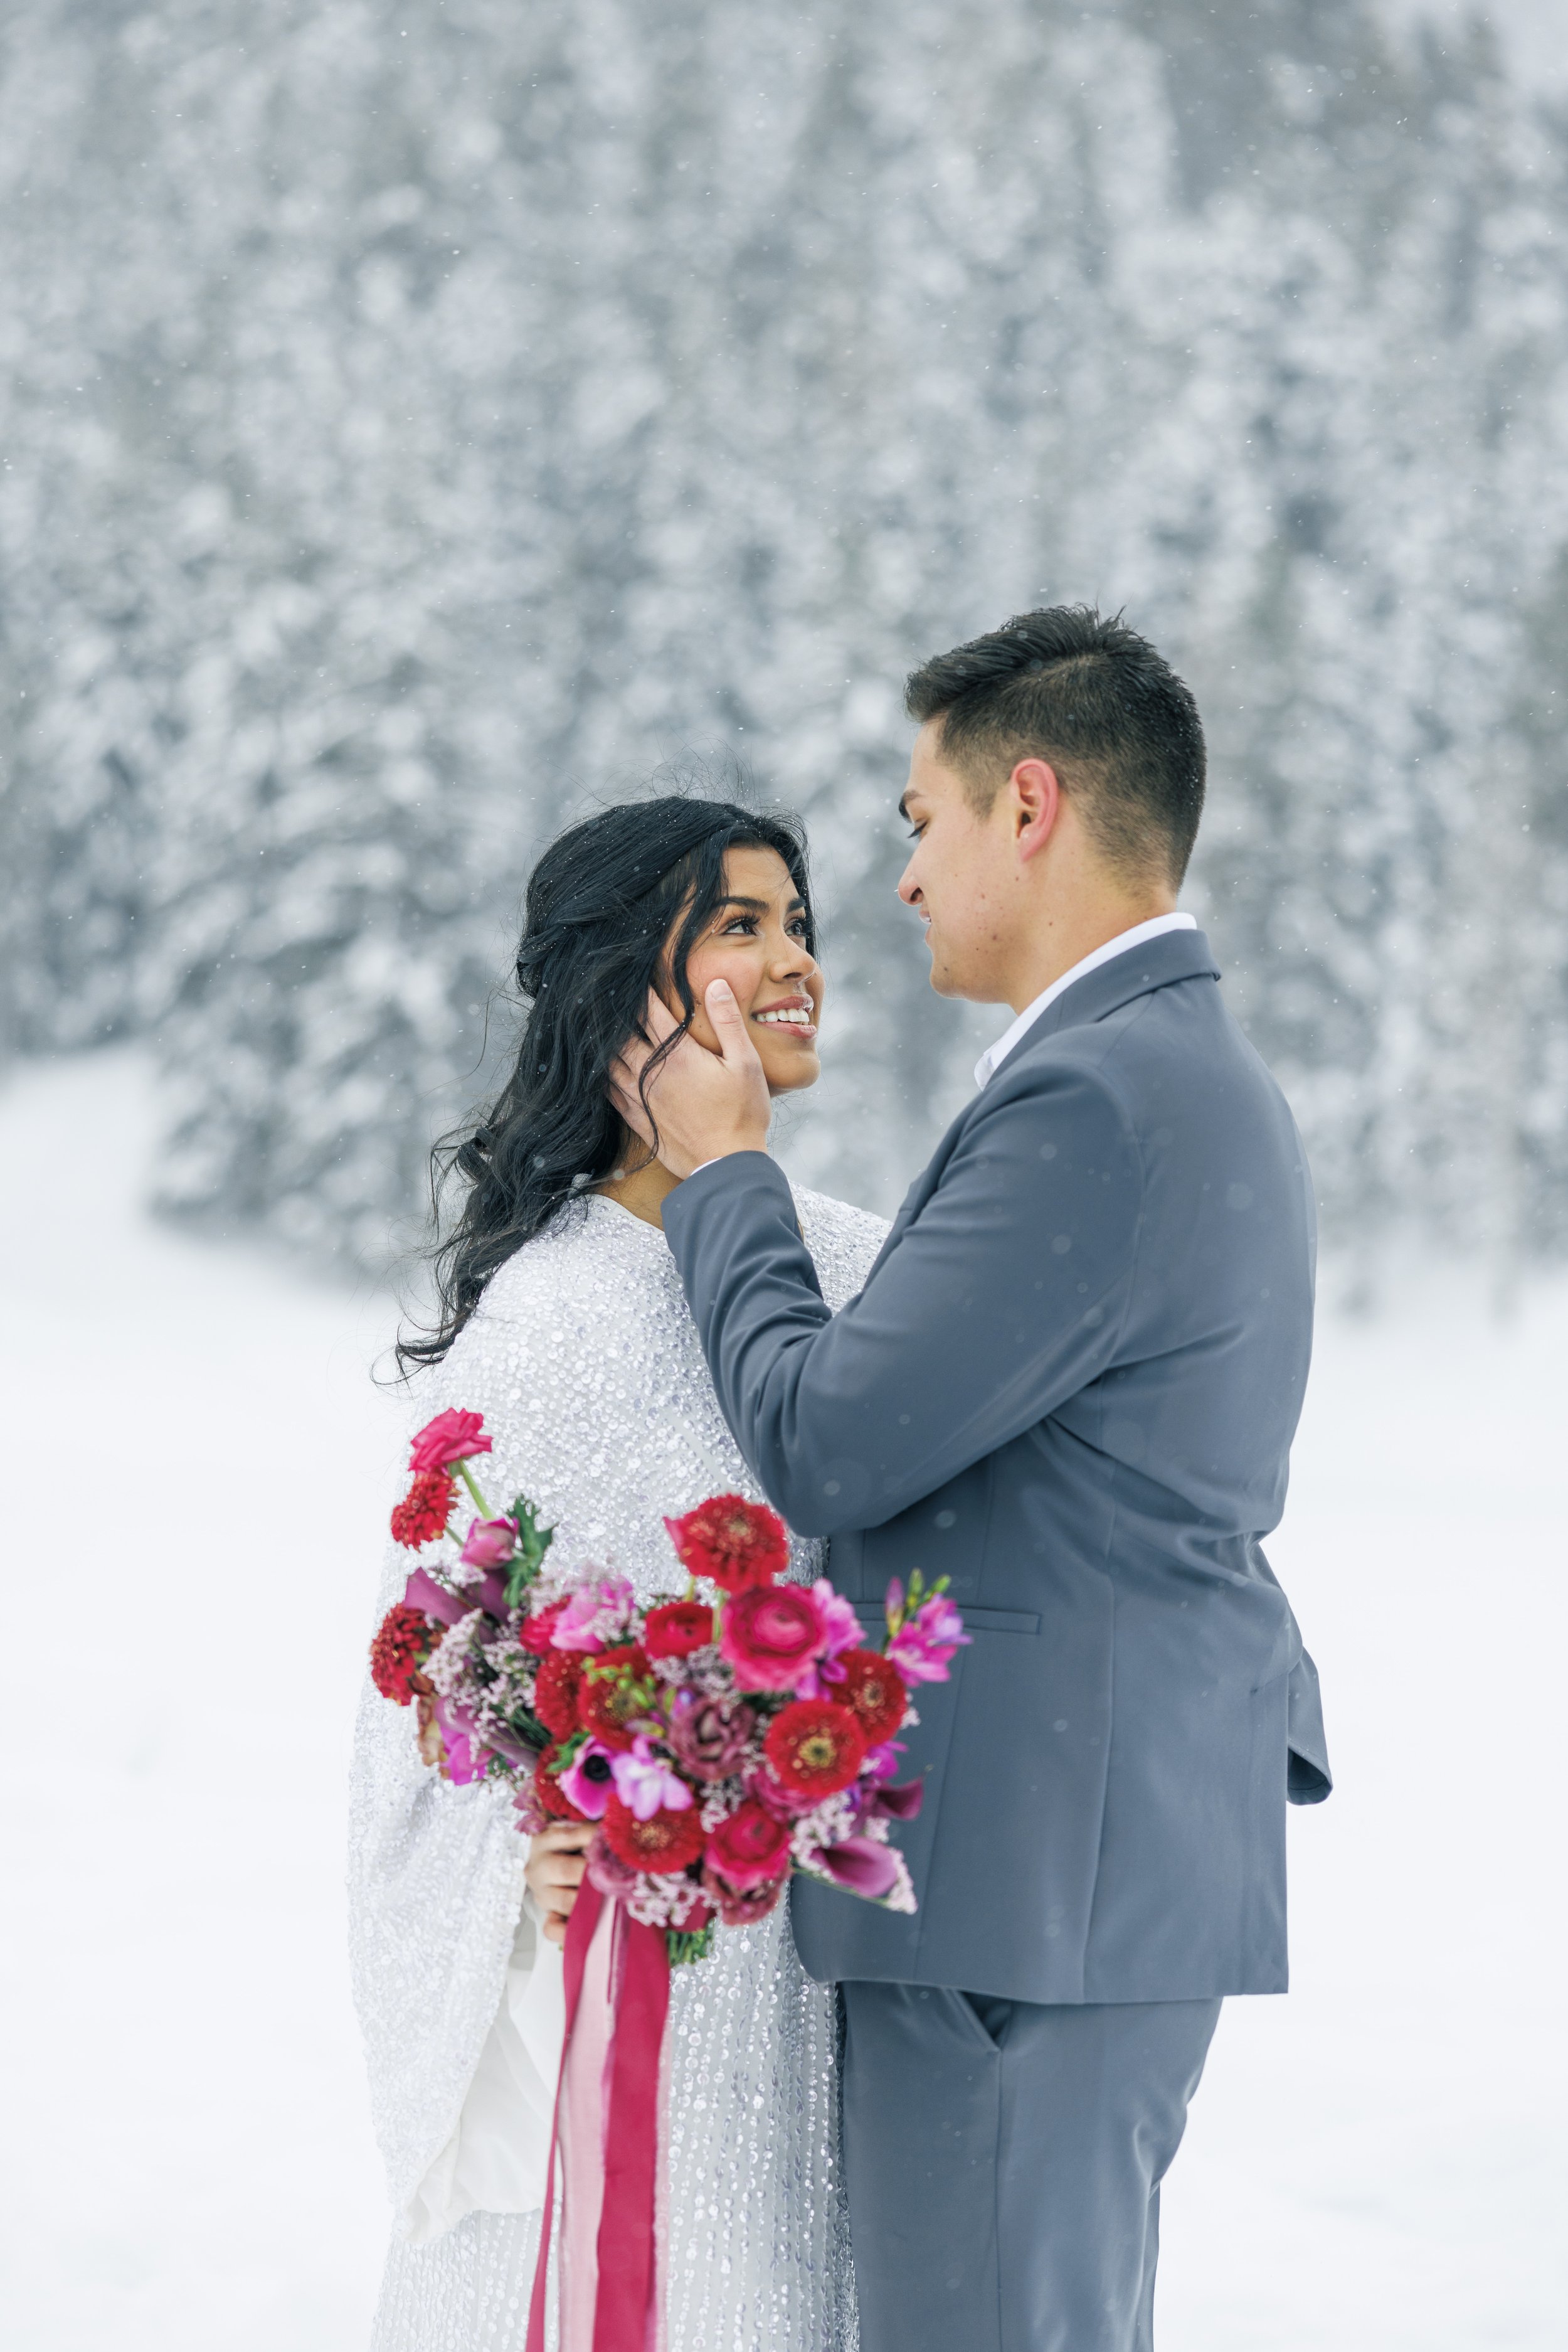  At Tibble Fork, Savanna Richardson Photography captures a groom and bride in the snow-covered mountain. red bouquet #SavannaRichardsonPhotography #SavannaRichardsonBridals #WinterBridals #WinterWedding #TibbleForkBridals #UtahBridals #MountainBridal